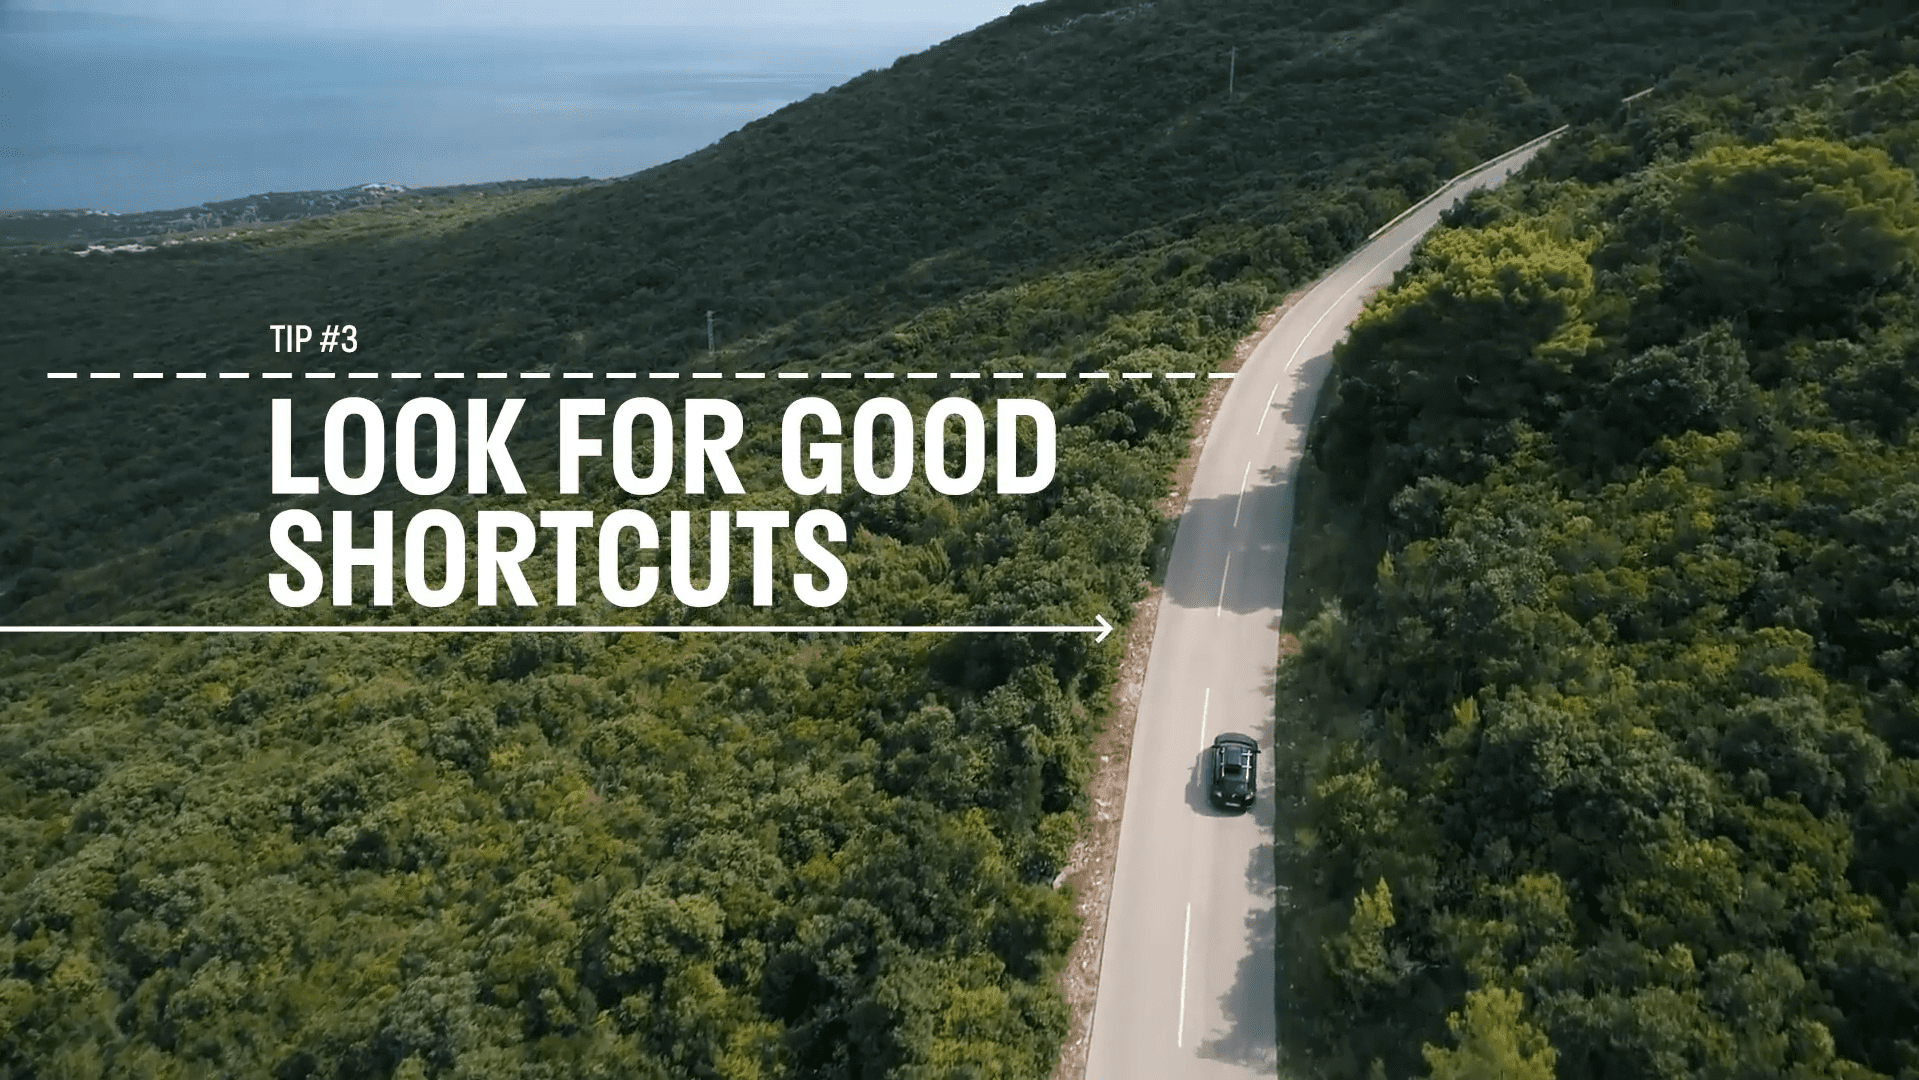 Image of a car driving on a road through a forested area with white text that reads Tip 3 Look for good shortcuts. How to scale up video production so you can make more content.